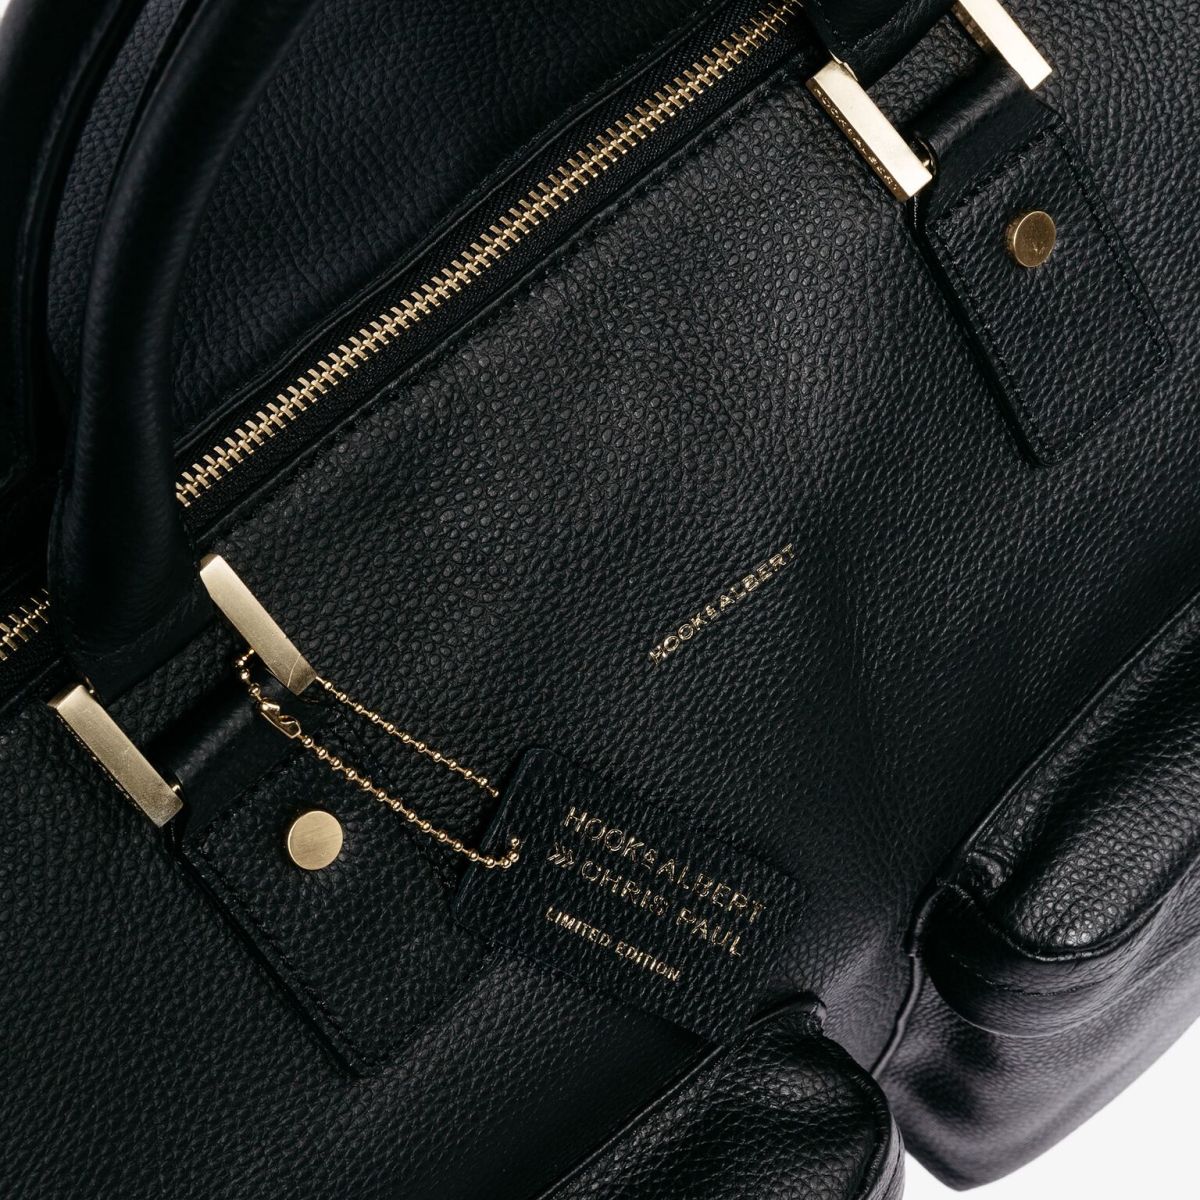 Hook & Albert's Game-Changing Travel Bag Is Back On Sale - Airows